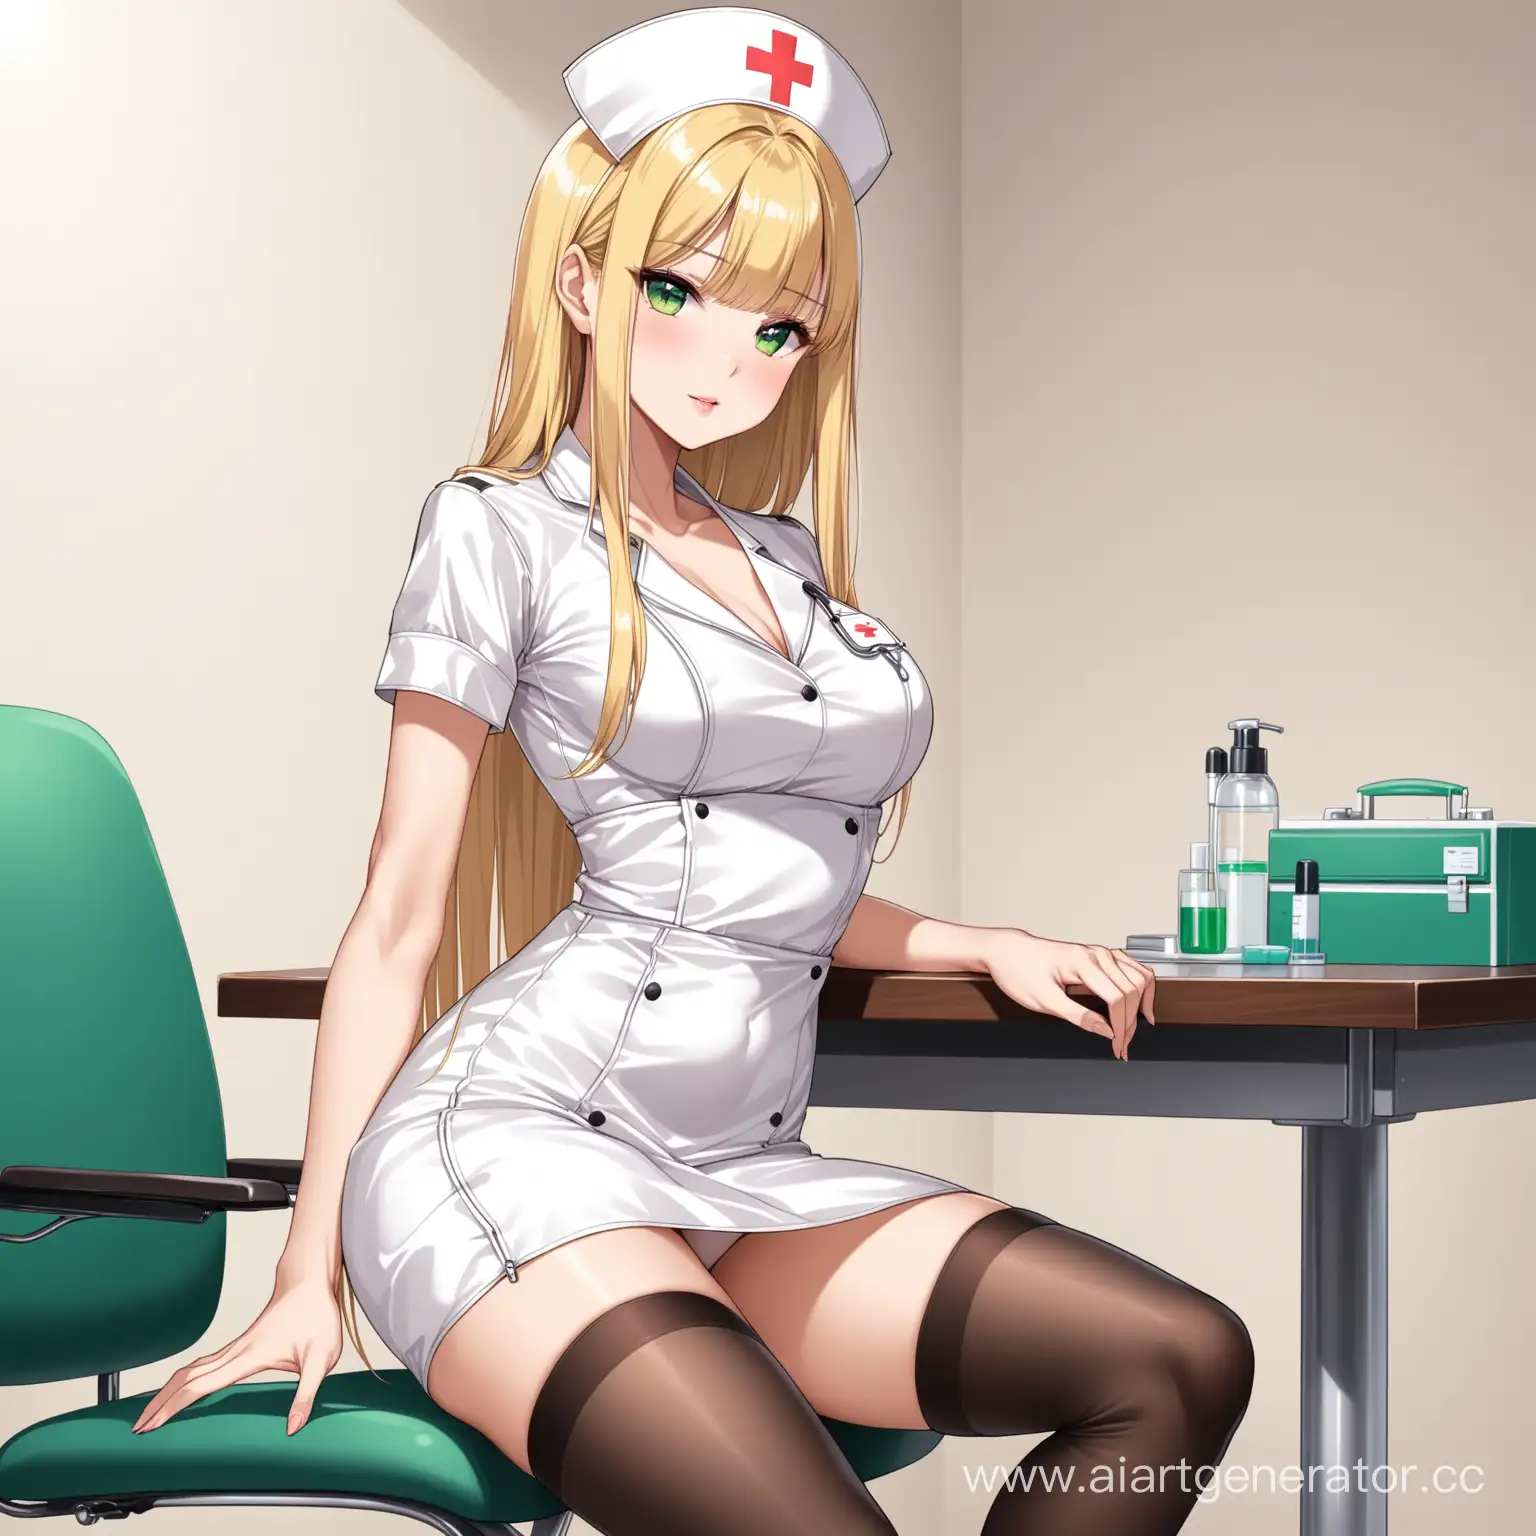 Seductive-Blonde-Nurse-in-Short-Dress-and-Stockings-at-Medical-Office